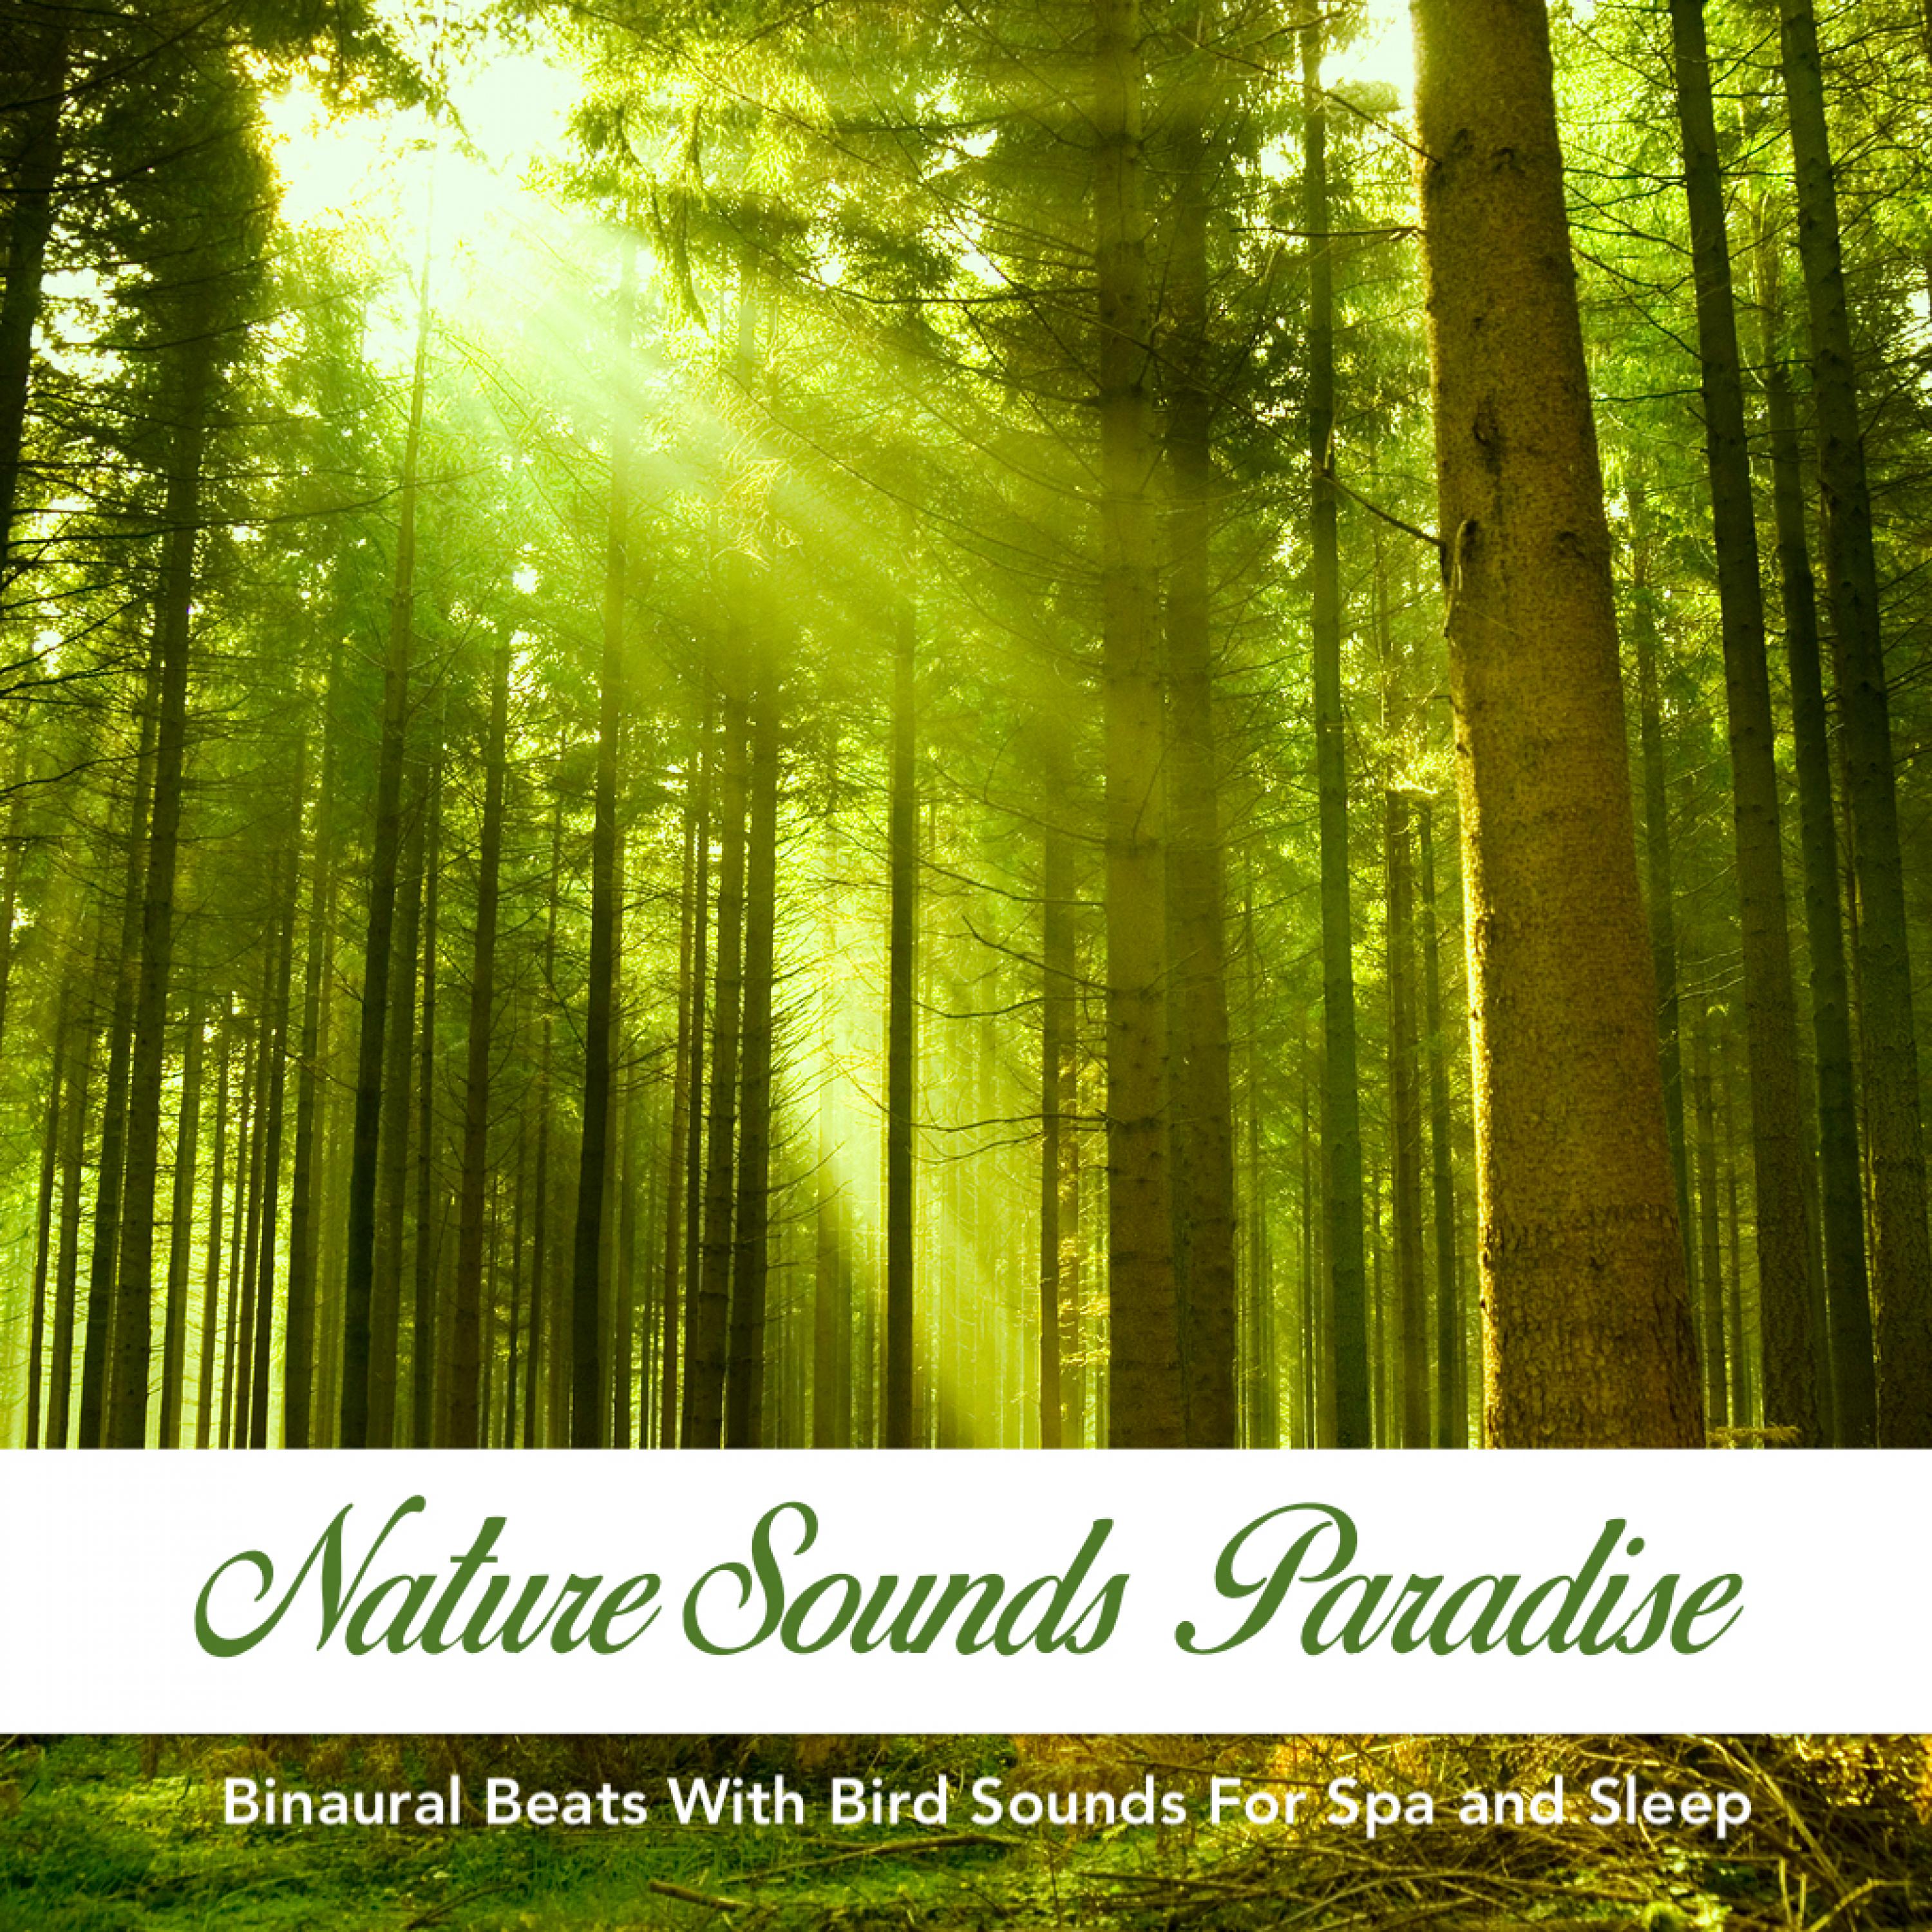 Nature Sounds Paradise: Binaural Beats With Bird Sounds For Spa and Sleep